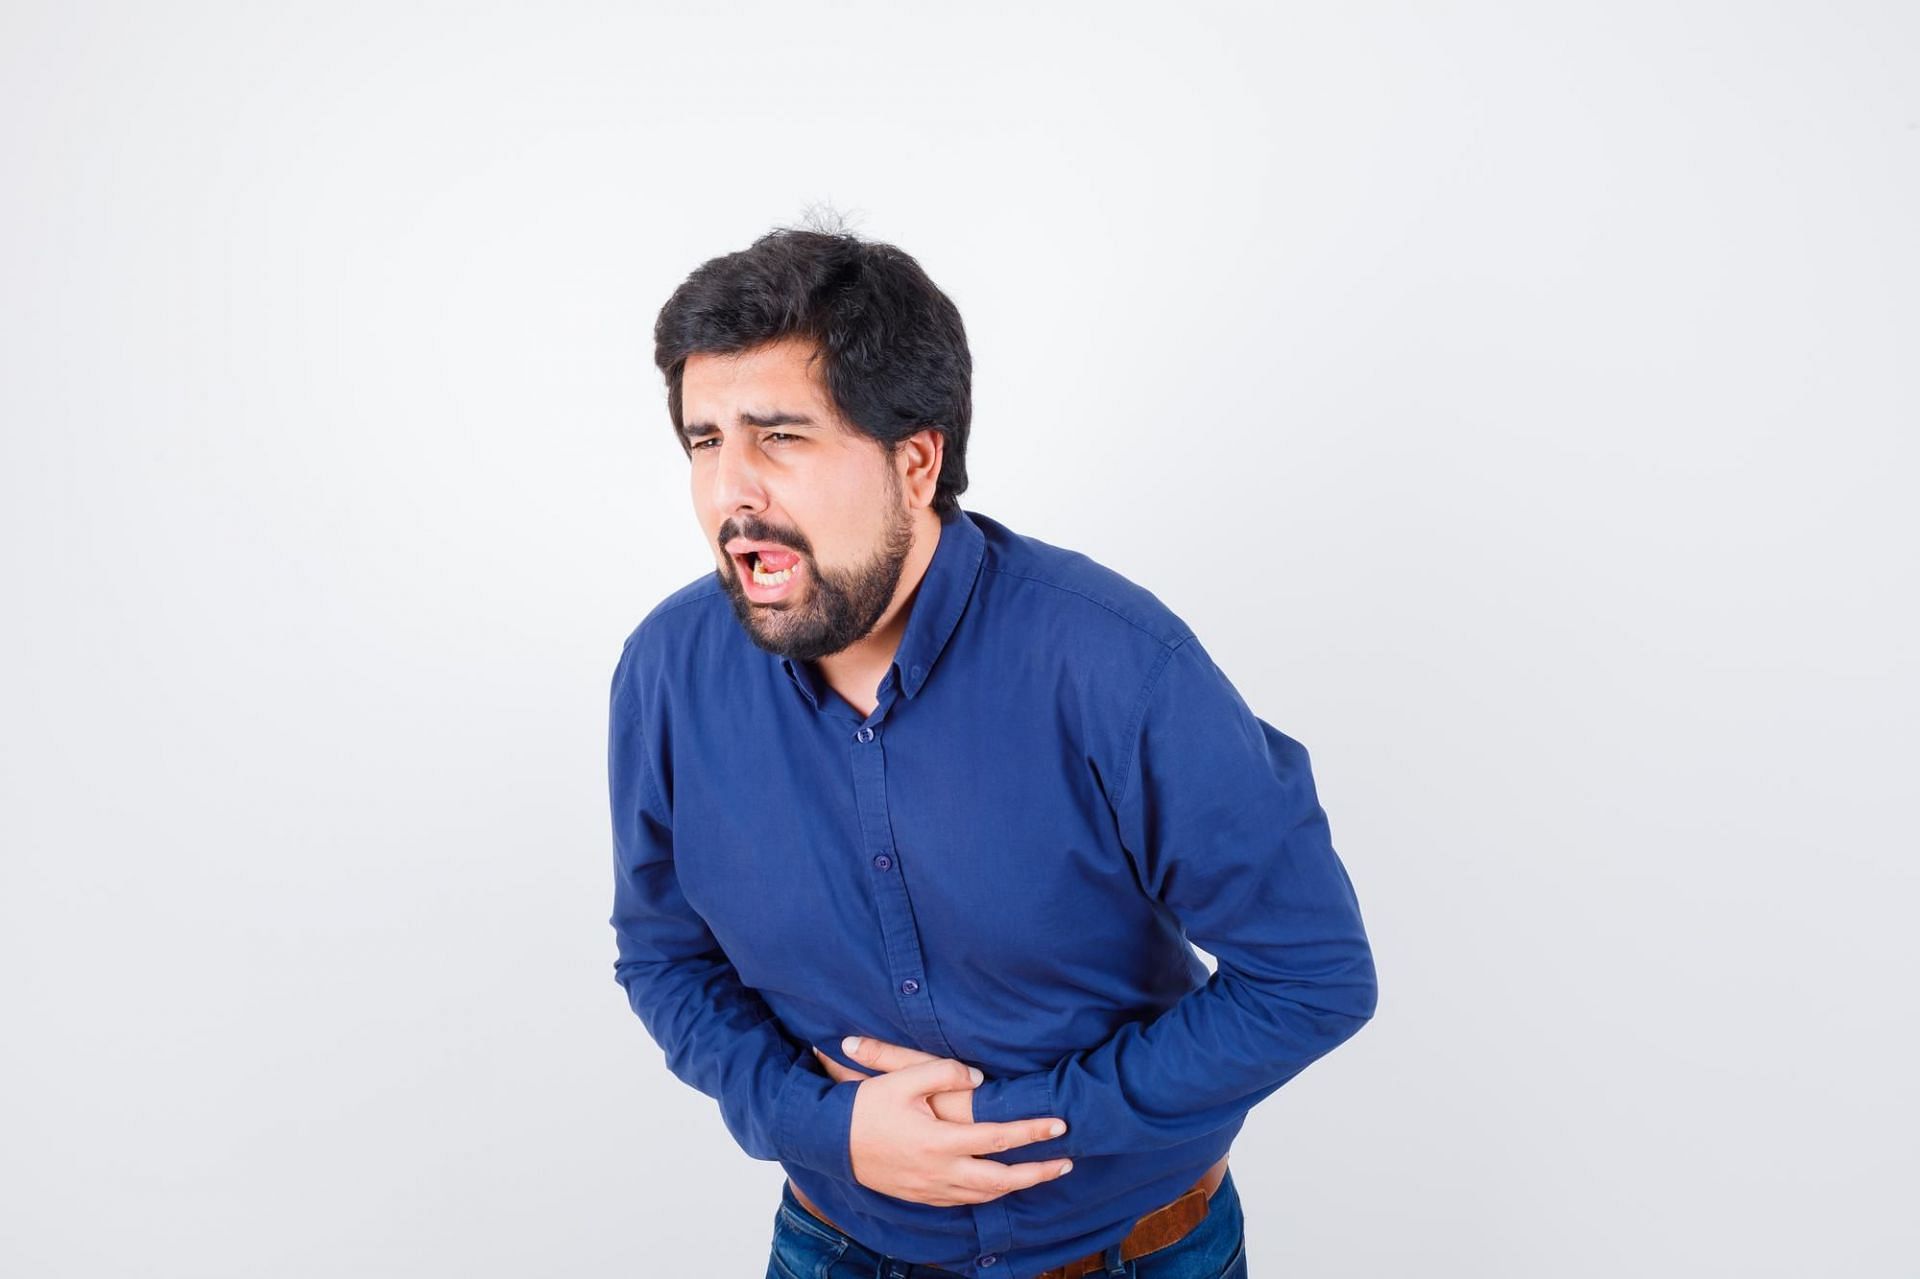 Anal fissures can cause pain during after bowel movements. (Image via Freepik/8photo)